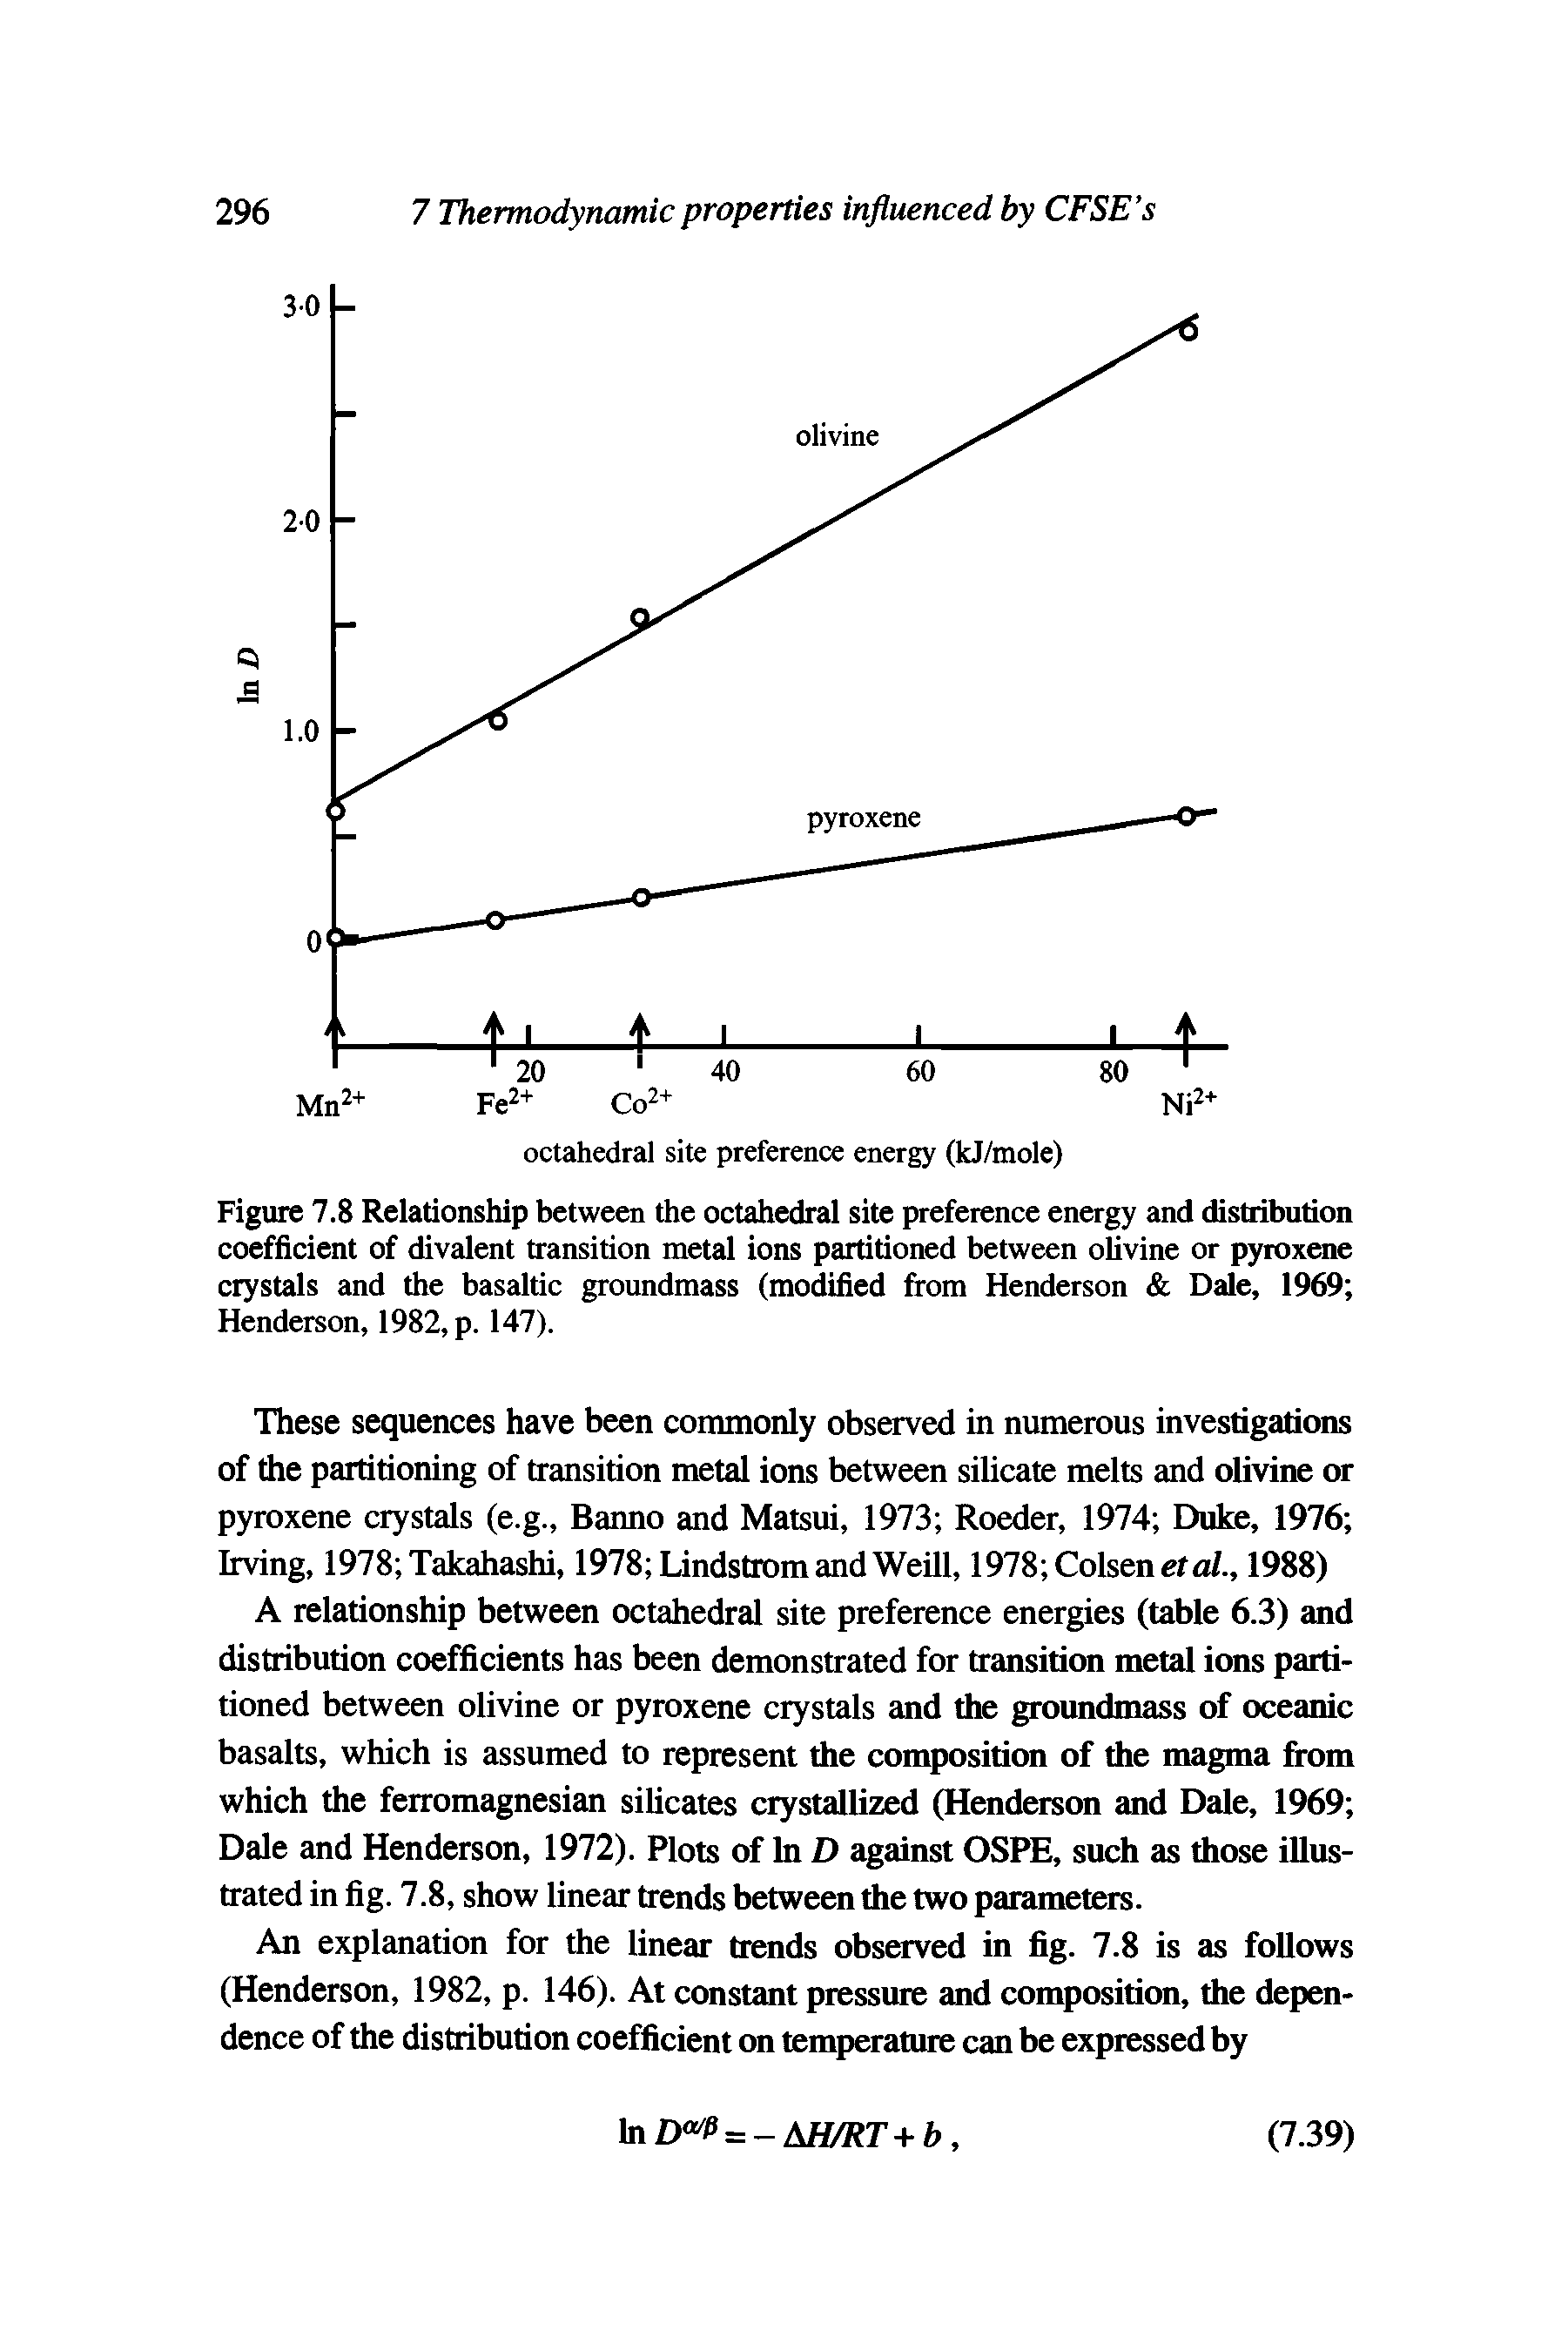 Figure 7.8 Relationship between the octahedral site preference energy and distribution coefficient of divalent transition metal ions partitioned between olivine or pyroxene crystals and the basaltic groundmass (modified from Henderson Dale, 1969 Henderson, 1982, p. 147).